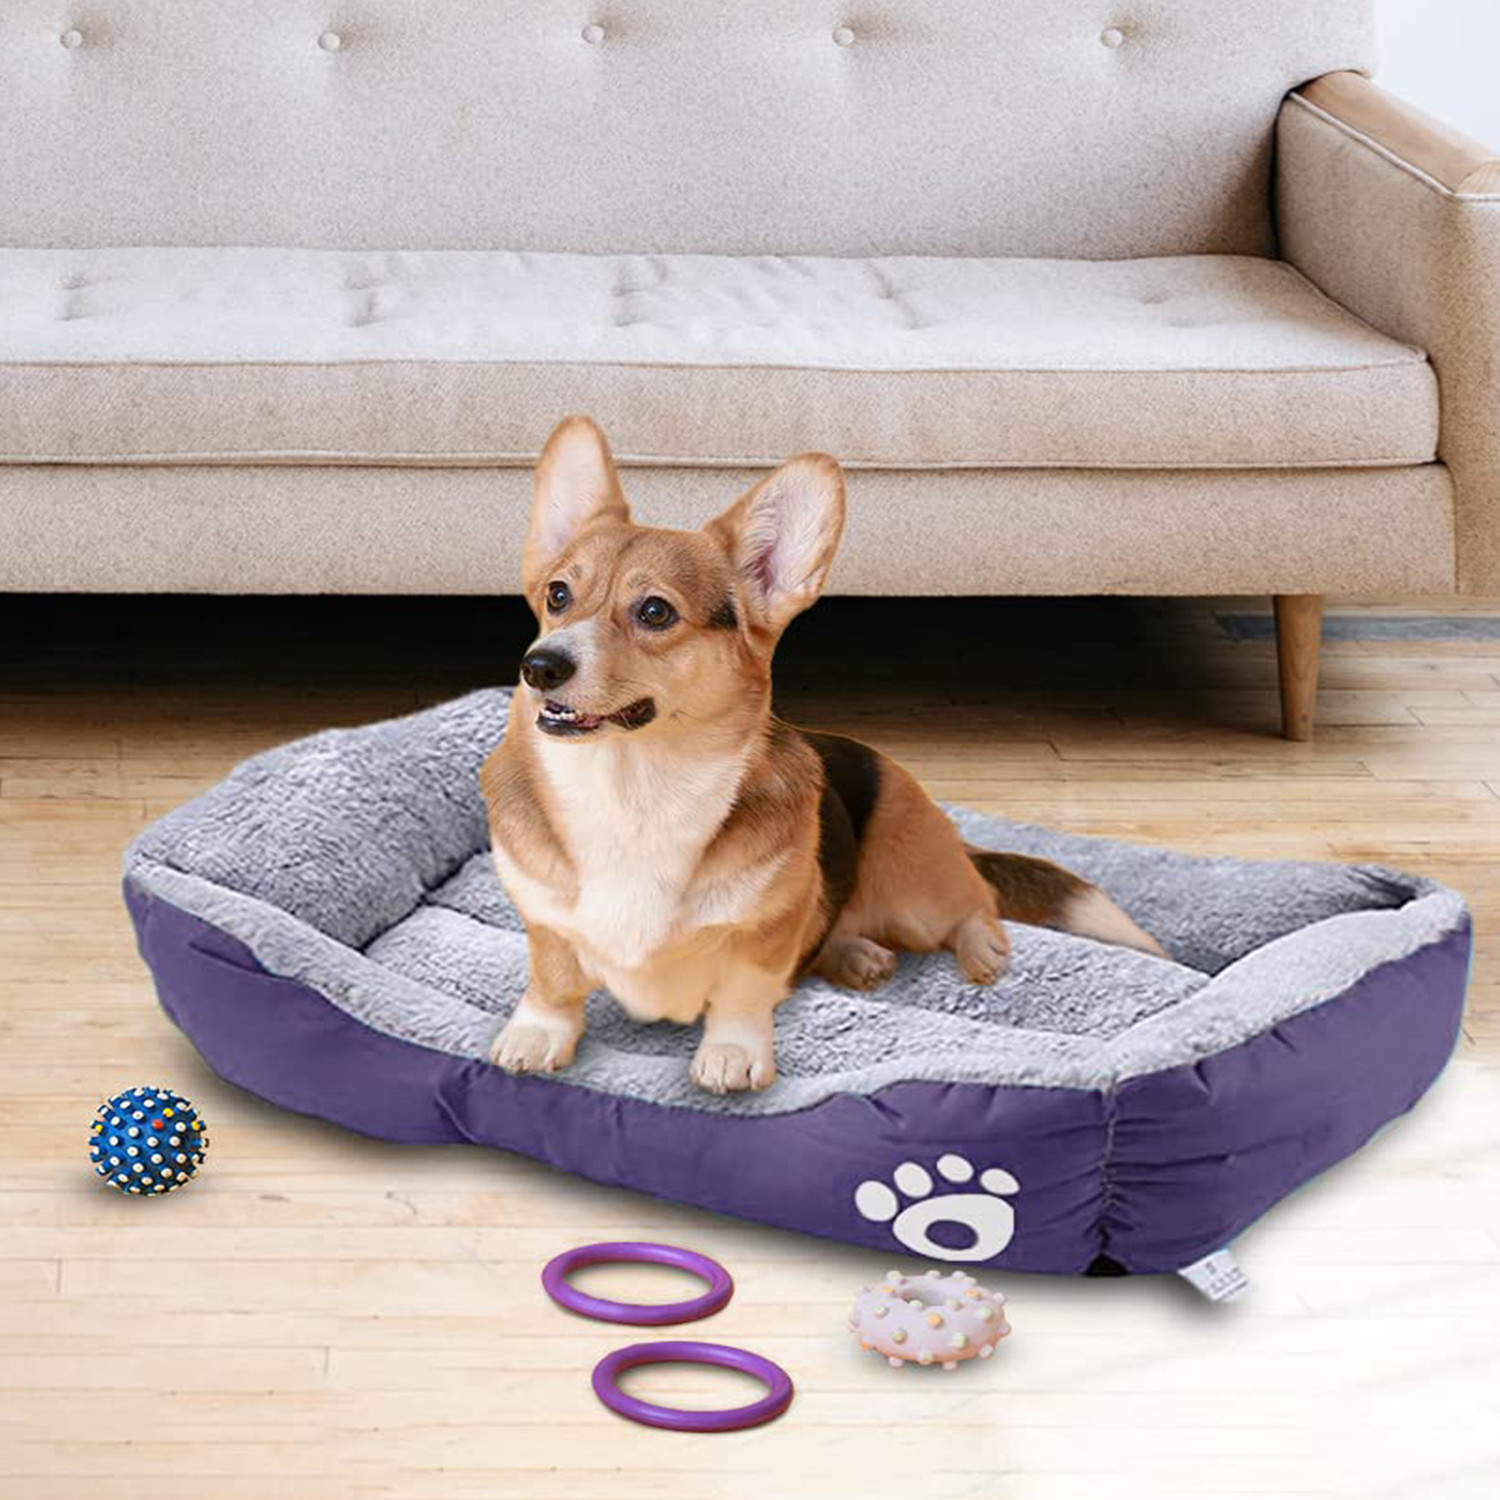 Kuber Industries Dog & Cat Bed|Super Soft Plush Top Pet Bed|Oxford Cloth Polyester Filling|Machine Washable Dog Bed|Rectangular Cat Bed with Rise-Edge Pillow|QY036P-L|Purple